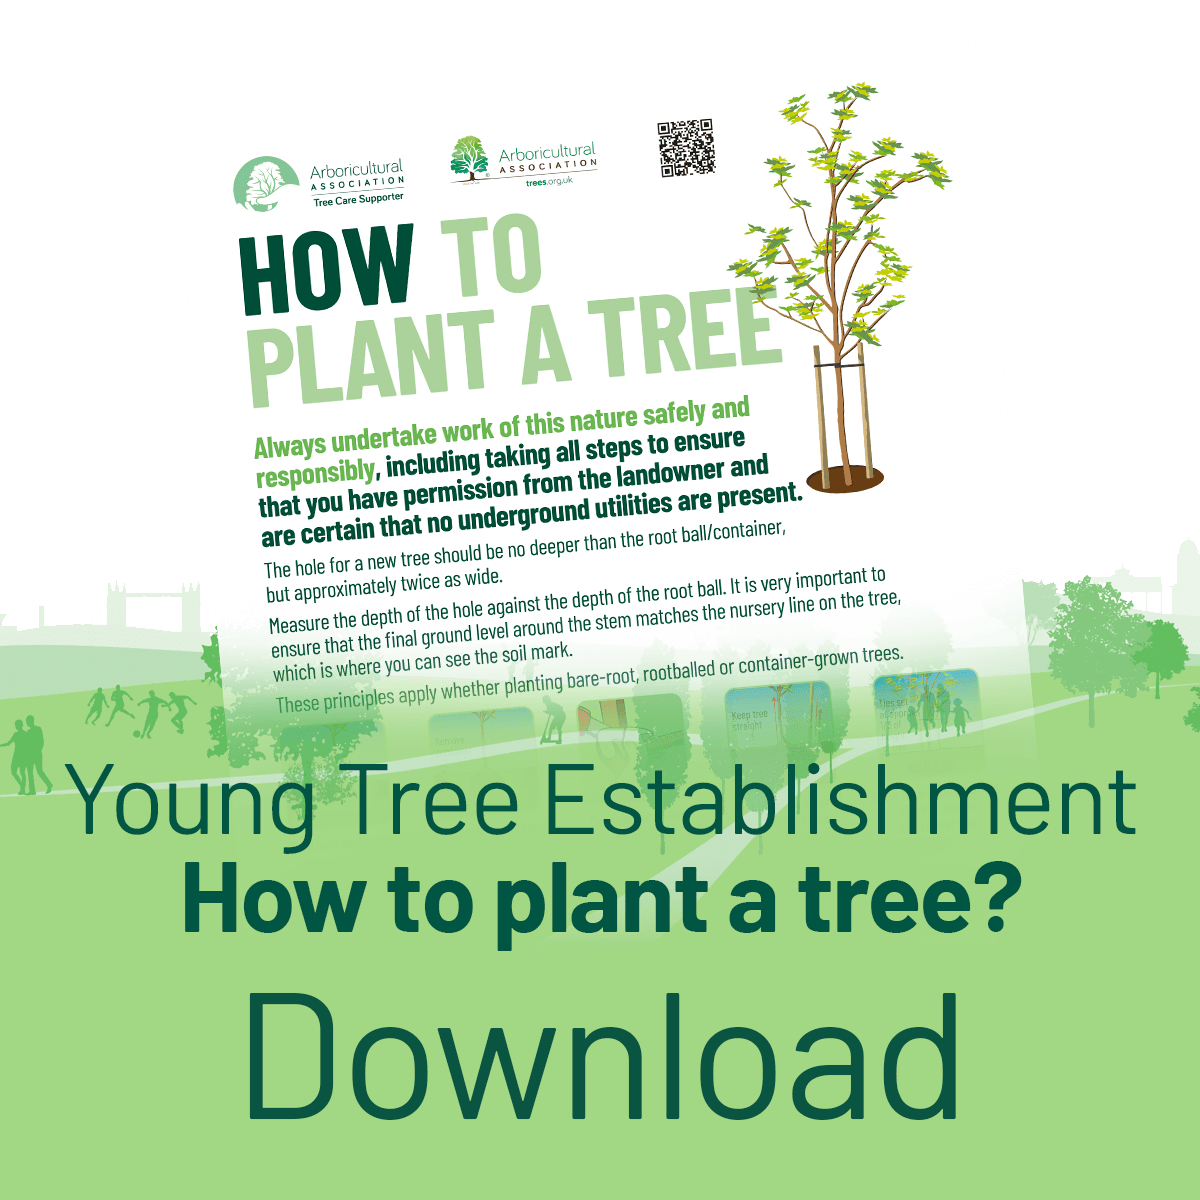 Download the Young Tree Establishment How to Plant a Tree Poster